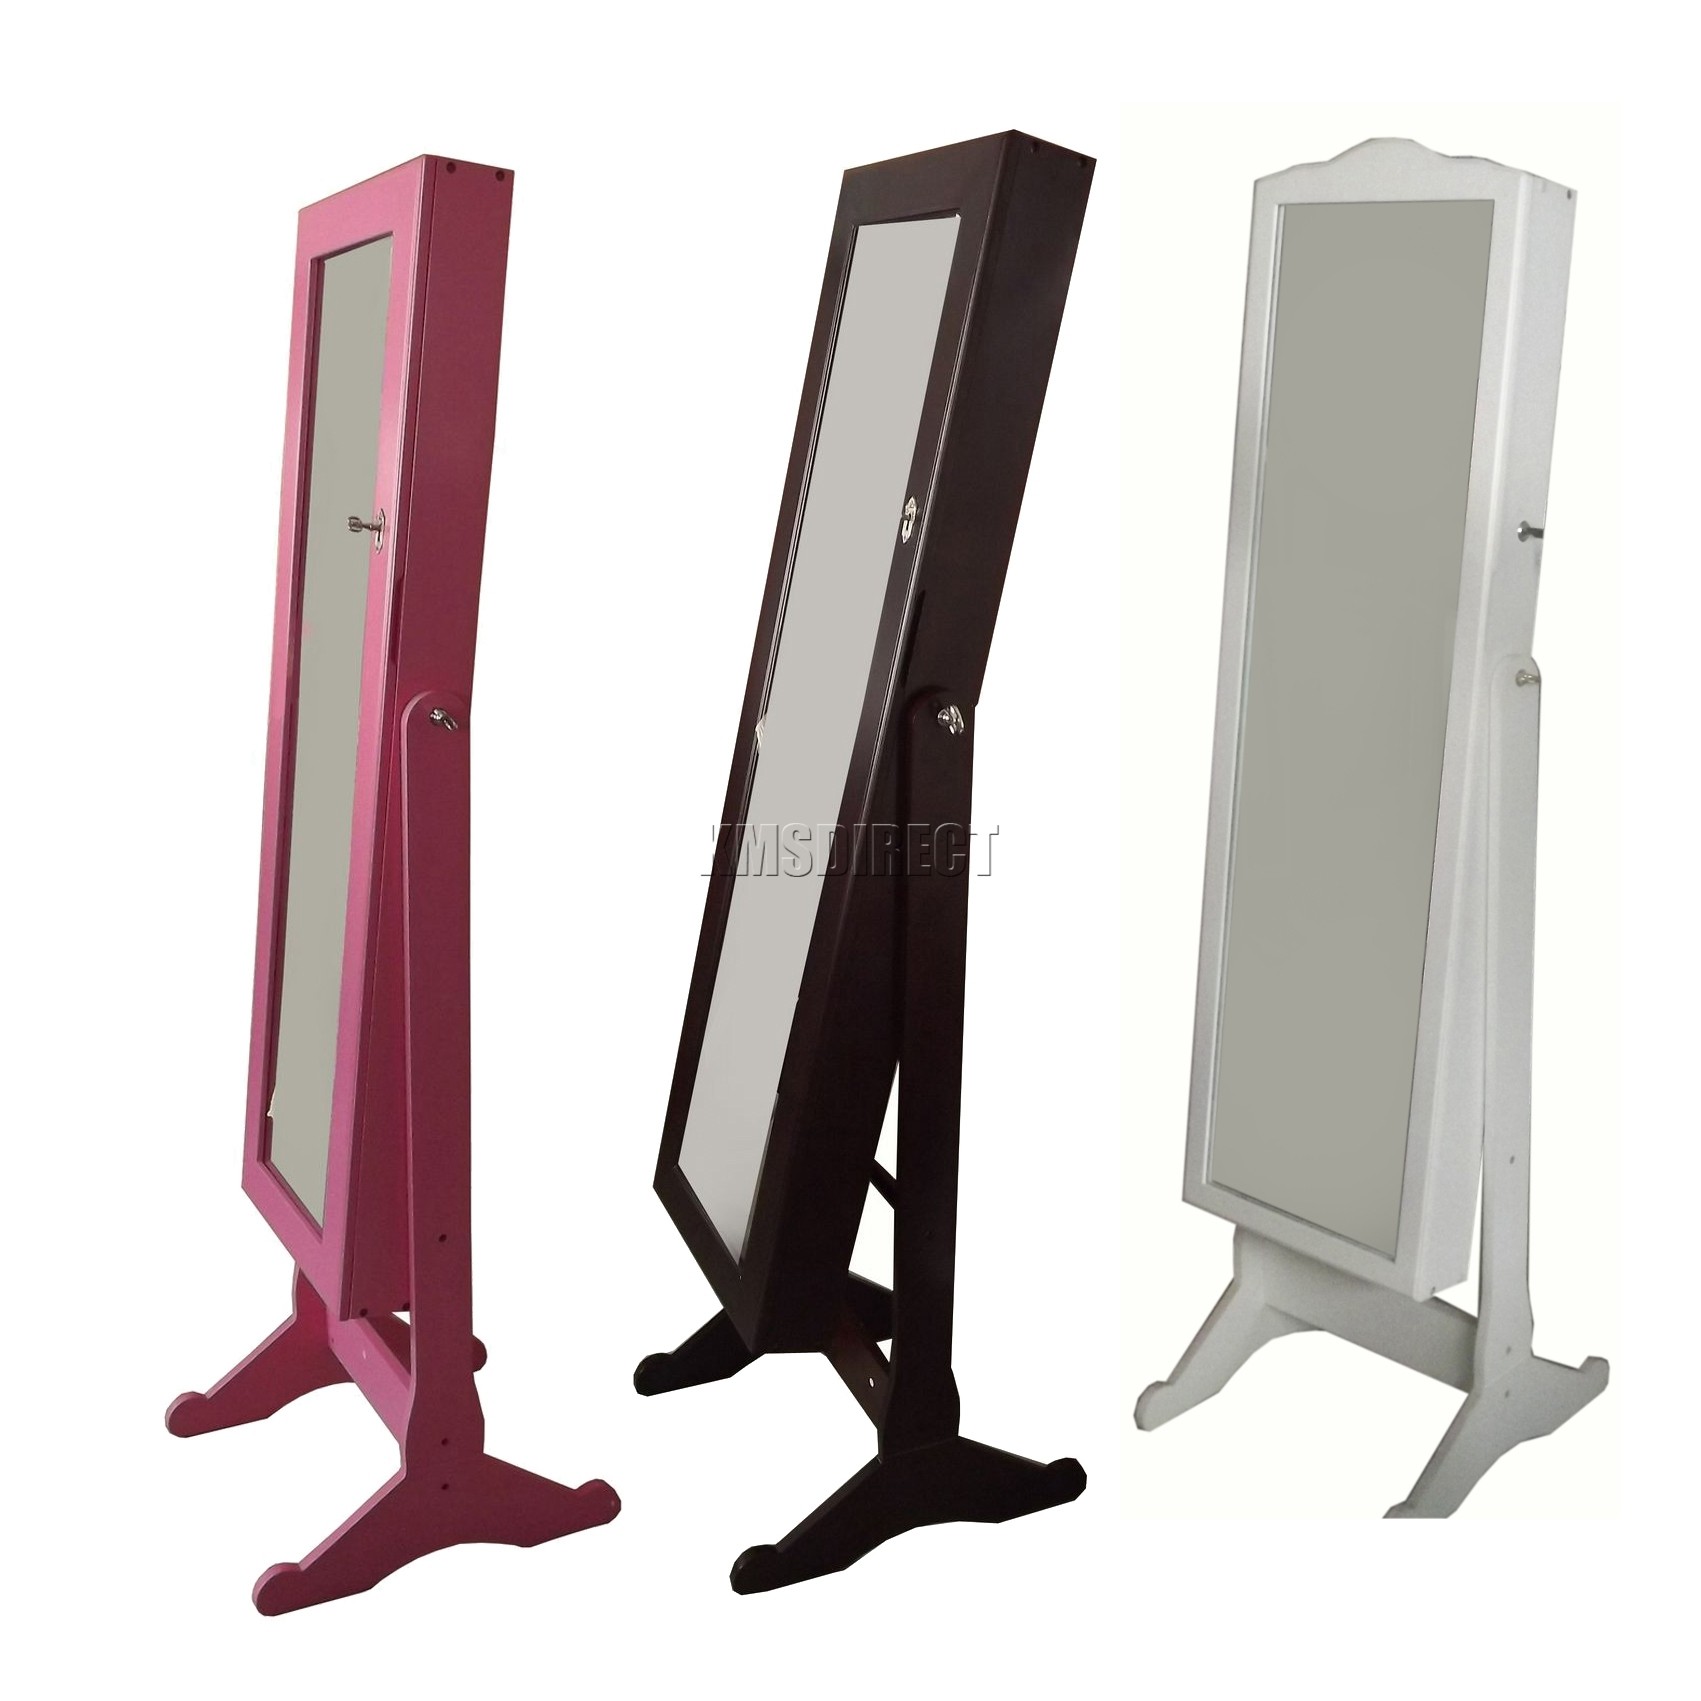 Stand alone mirror with storage